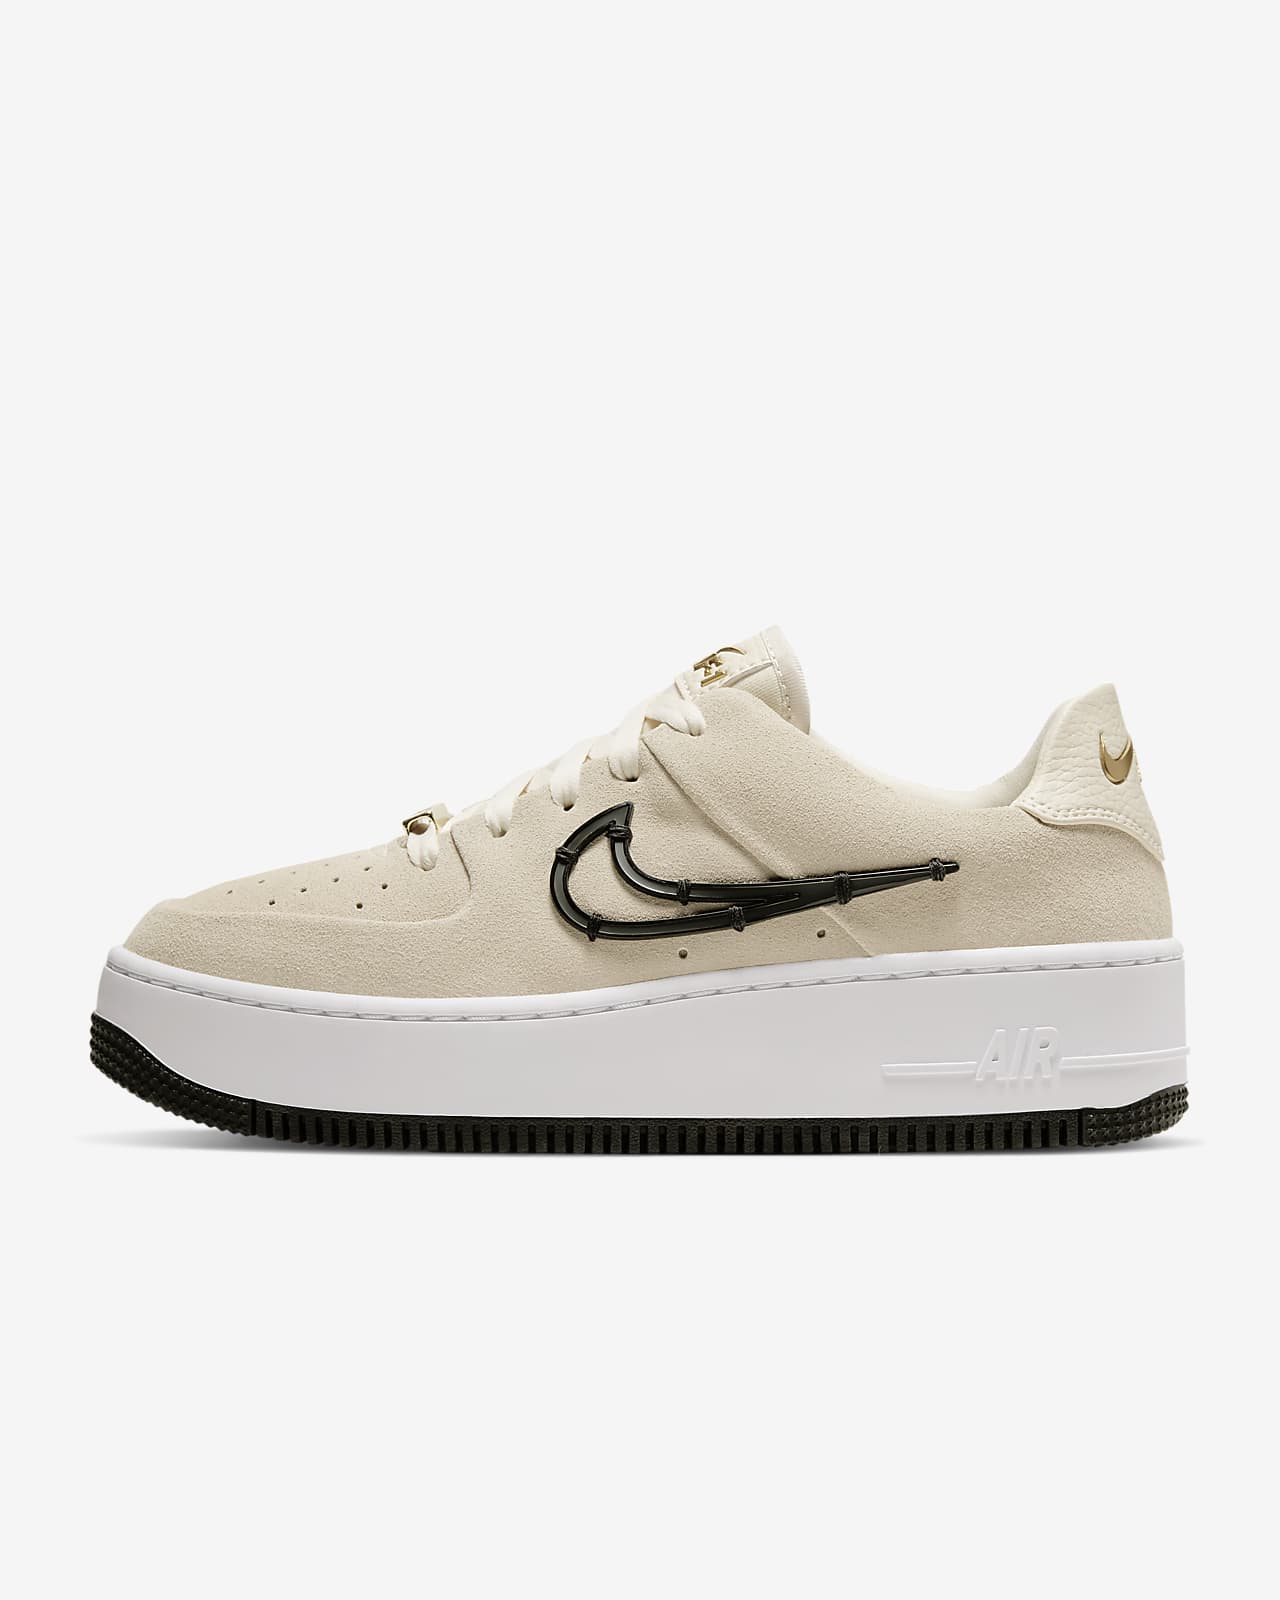 nike air force 1 sage low women's review